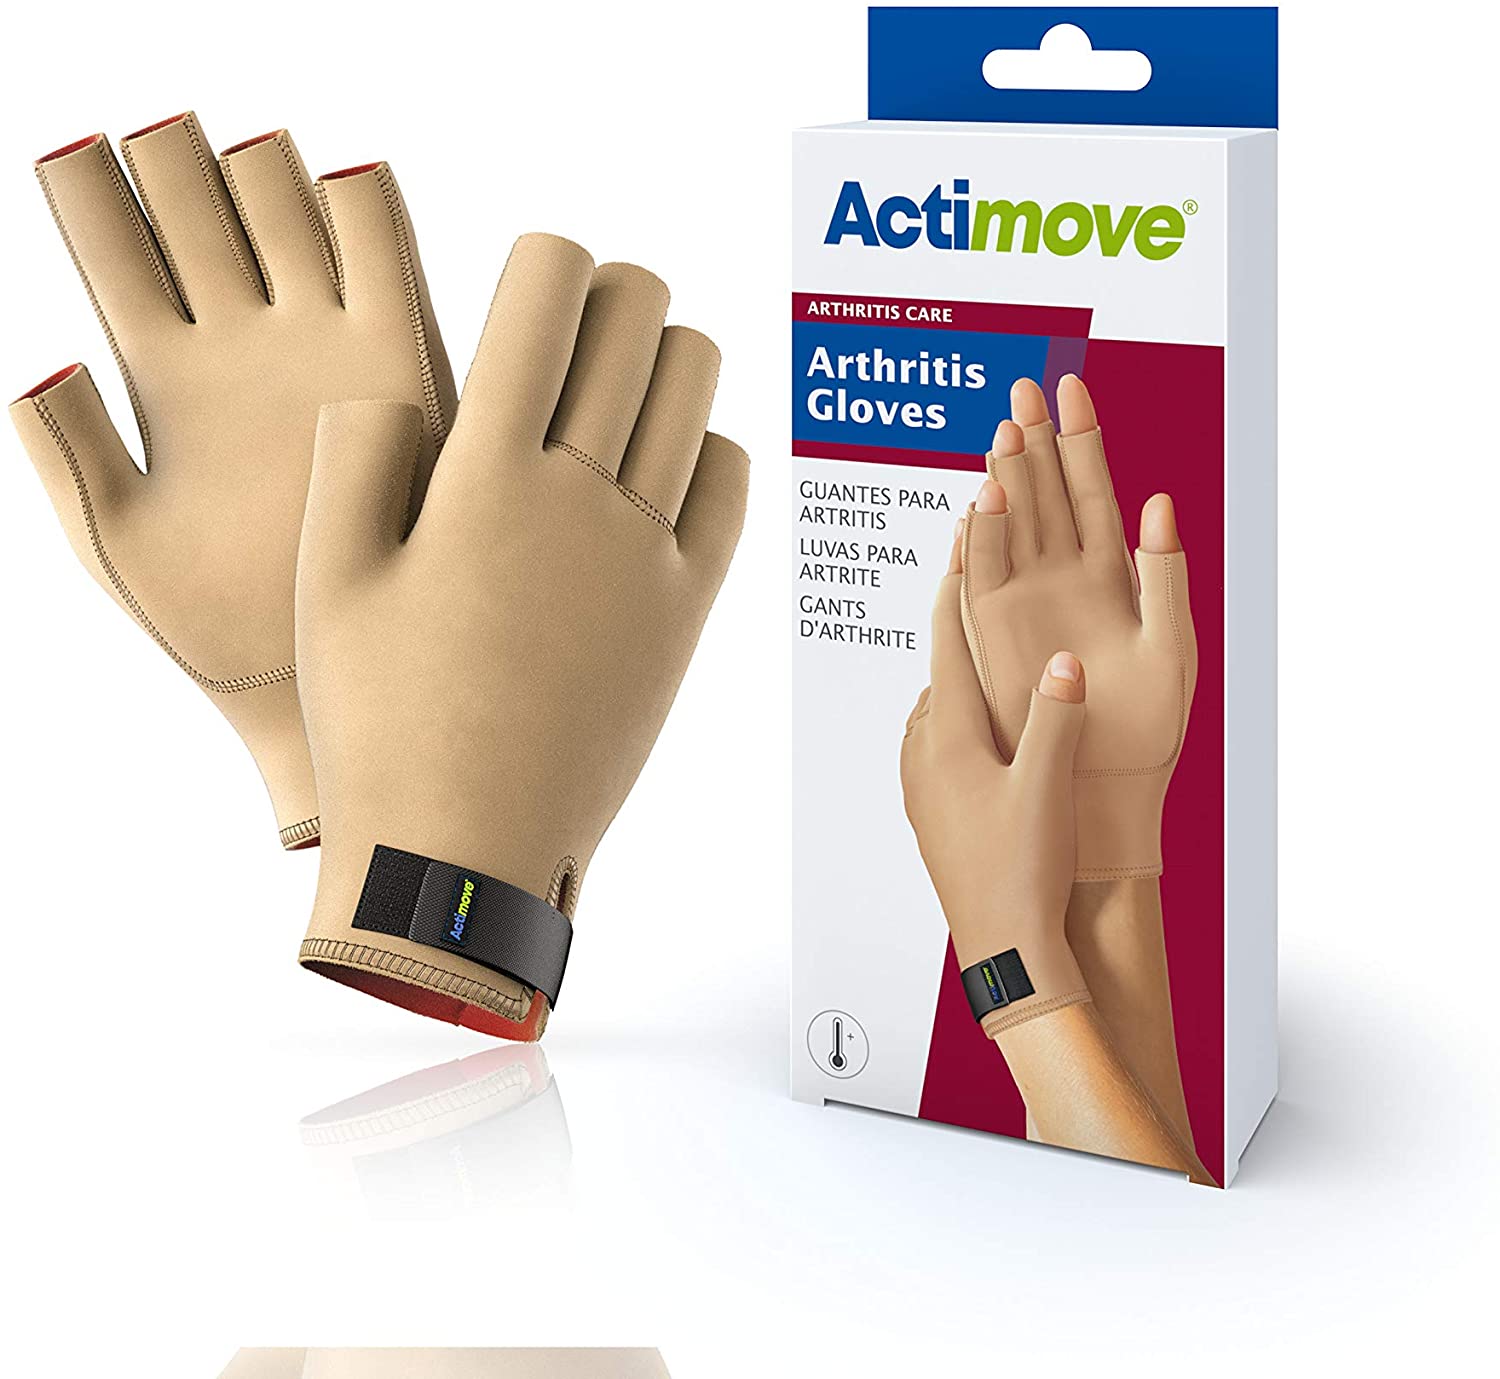 Arthritis Gloves are designed to help relieve aches, pains, and stiffness associated with arthritis of the hands.  Arthritis gloves in EL Paso, Tx.